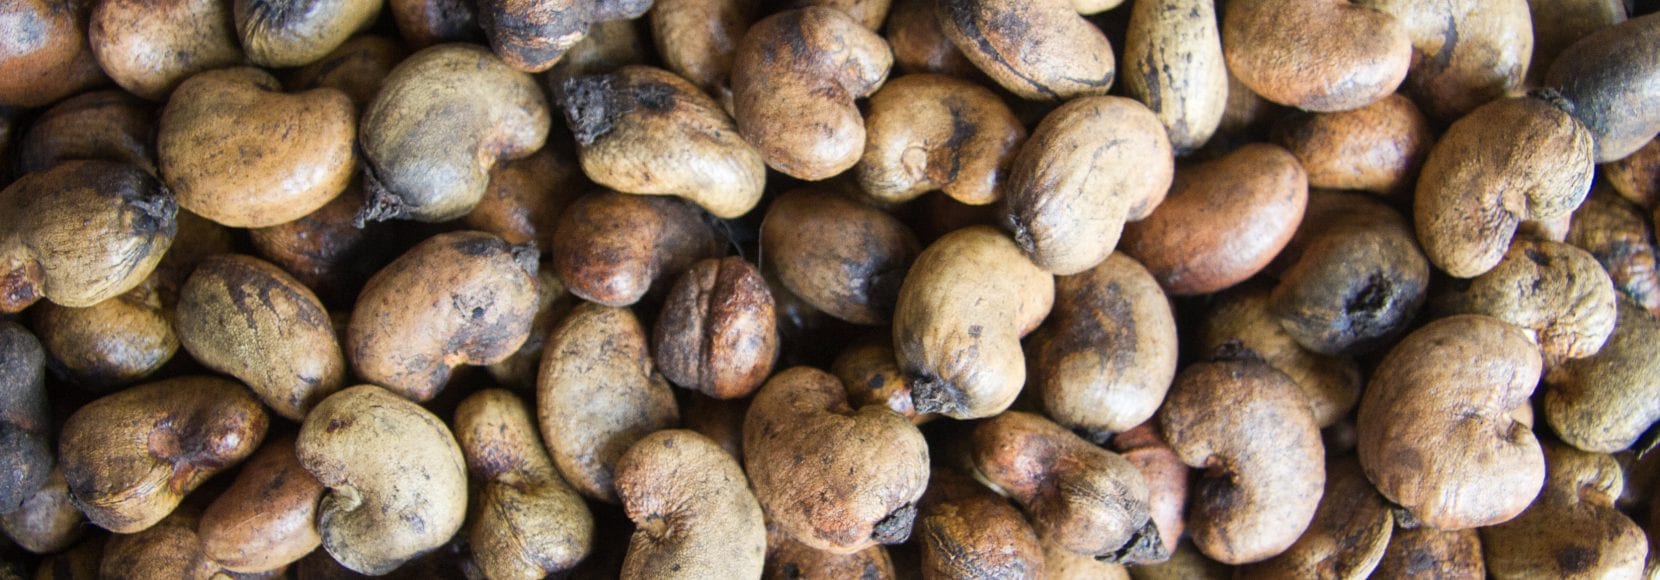 The cashew industry is an essential focus among TechnoServe programs. This photo features a close-up of cashews in shell, Agri-Business Company cashew factory, Touba, C™te d'Ivoire. Cashews in shell, Agri-Business Company cashew factory, Touba, Côte d'Ivoire.